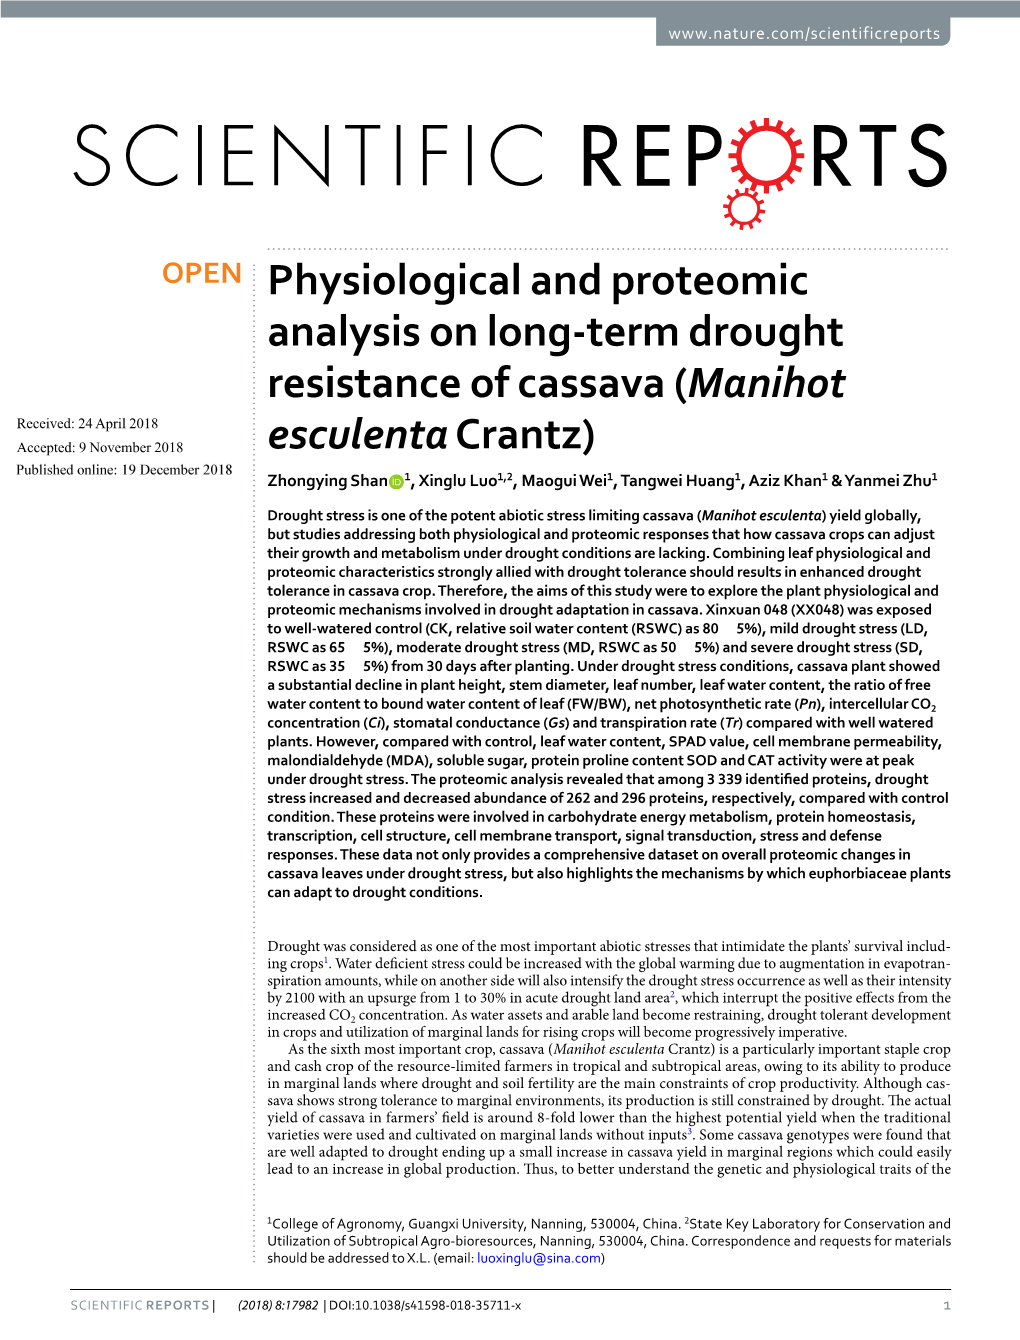 Physiological and Proteomic Analysis on Long-Term Drought Resistance of Cassava (Manihot Esculenta Crantz)